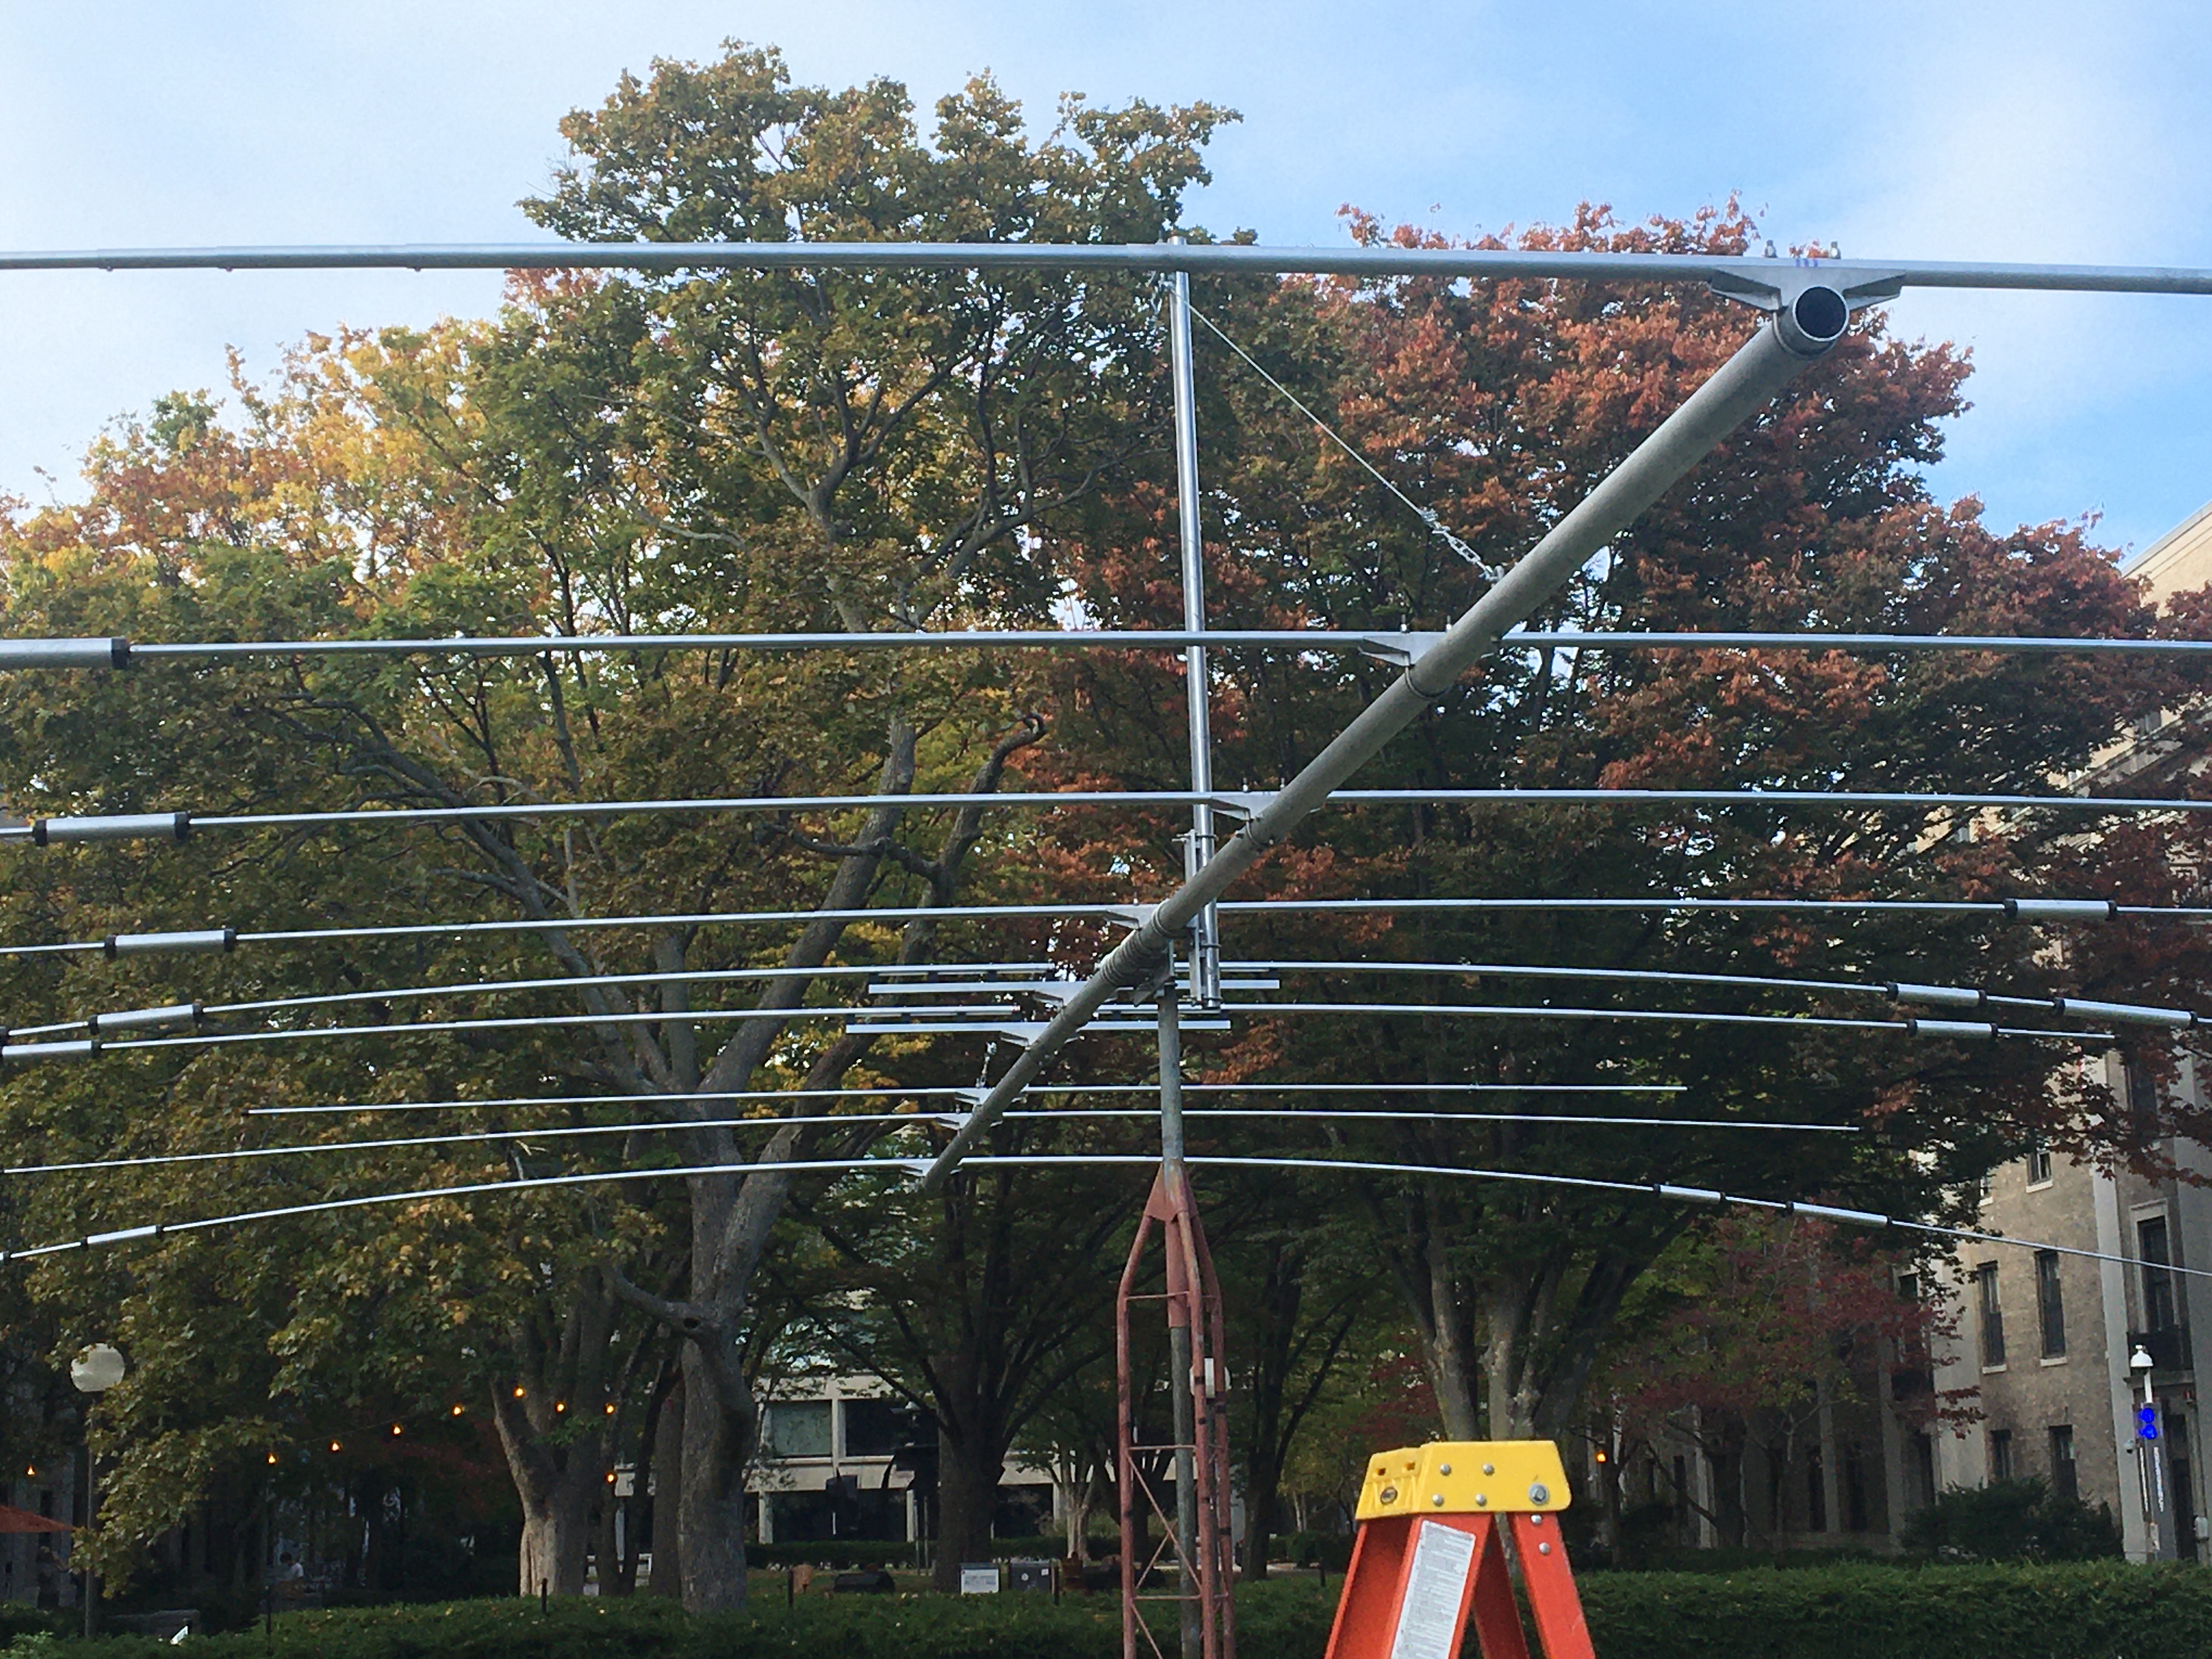 The assembled antenna on the Walker Memorial lawn.